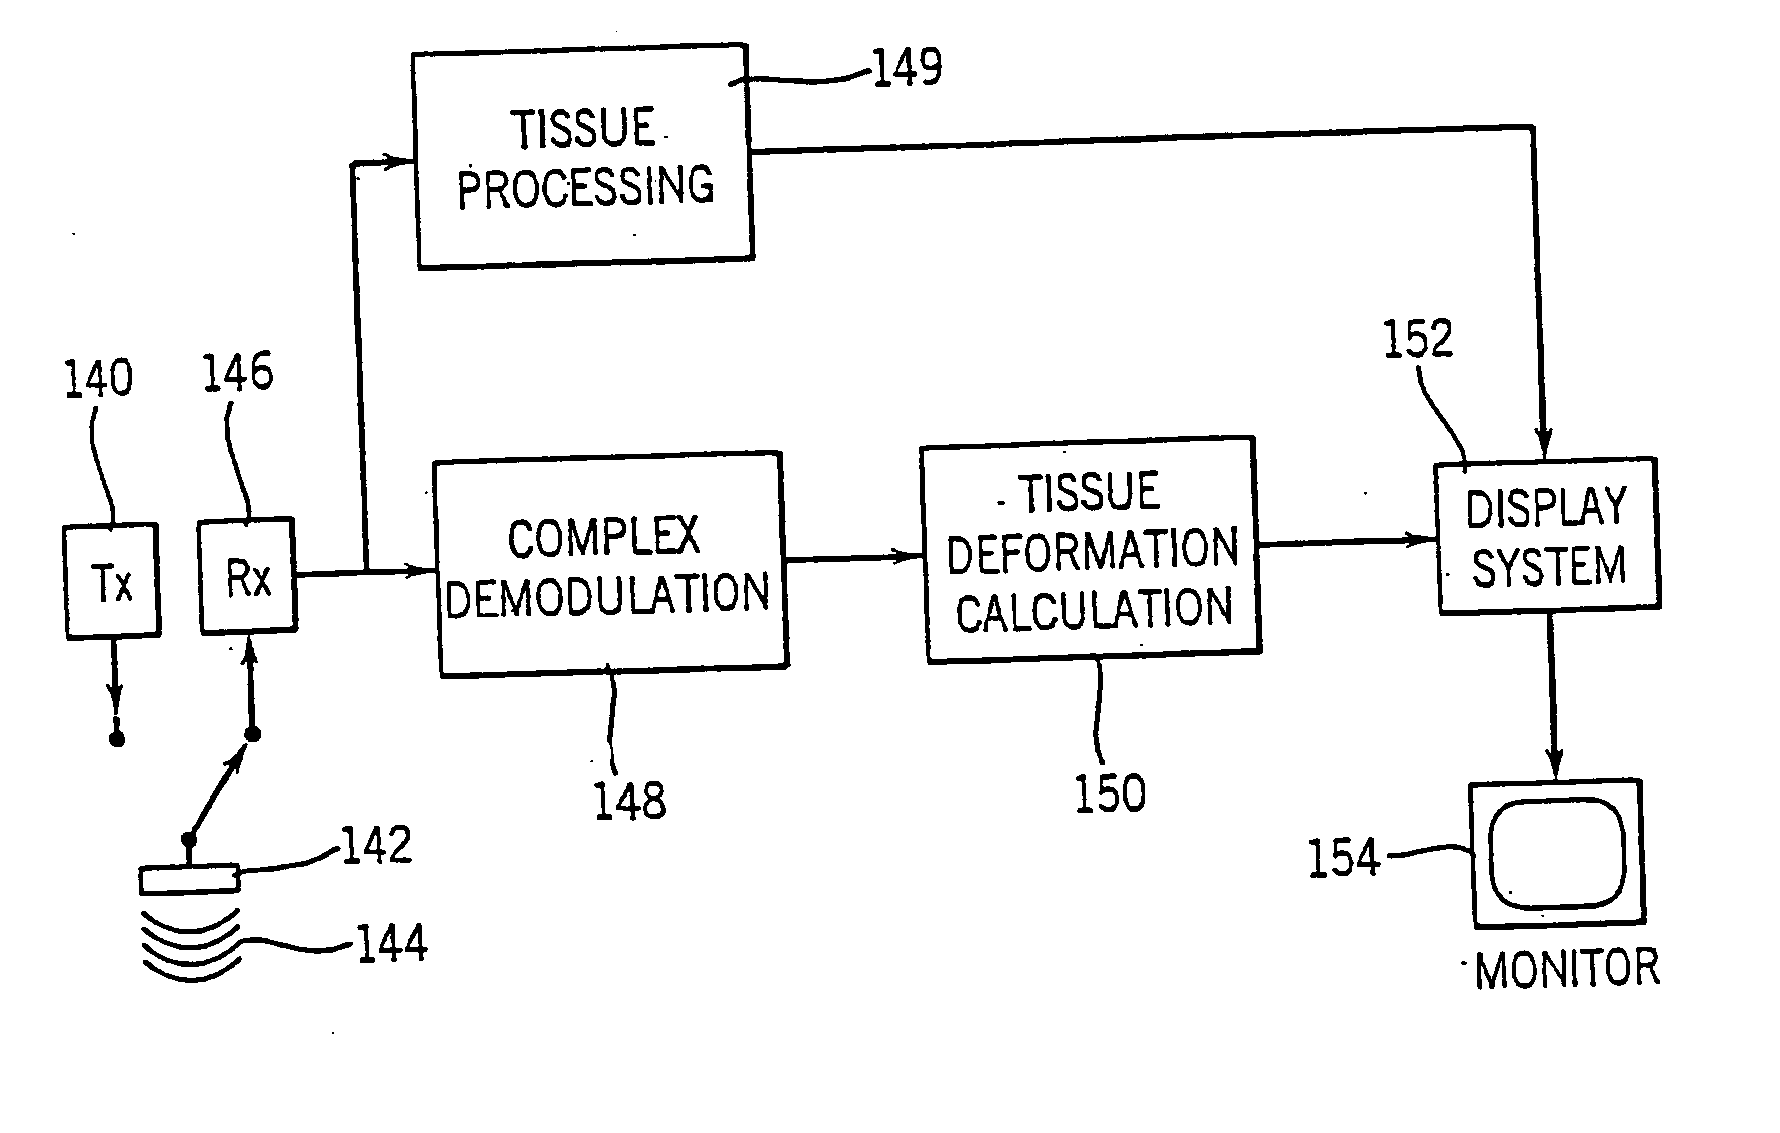 Method and apparatus for providing real-time calculation and display of tissue deformation in ultrasound imaging